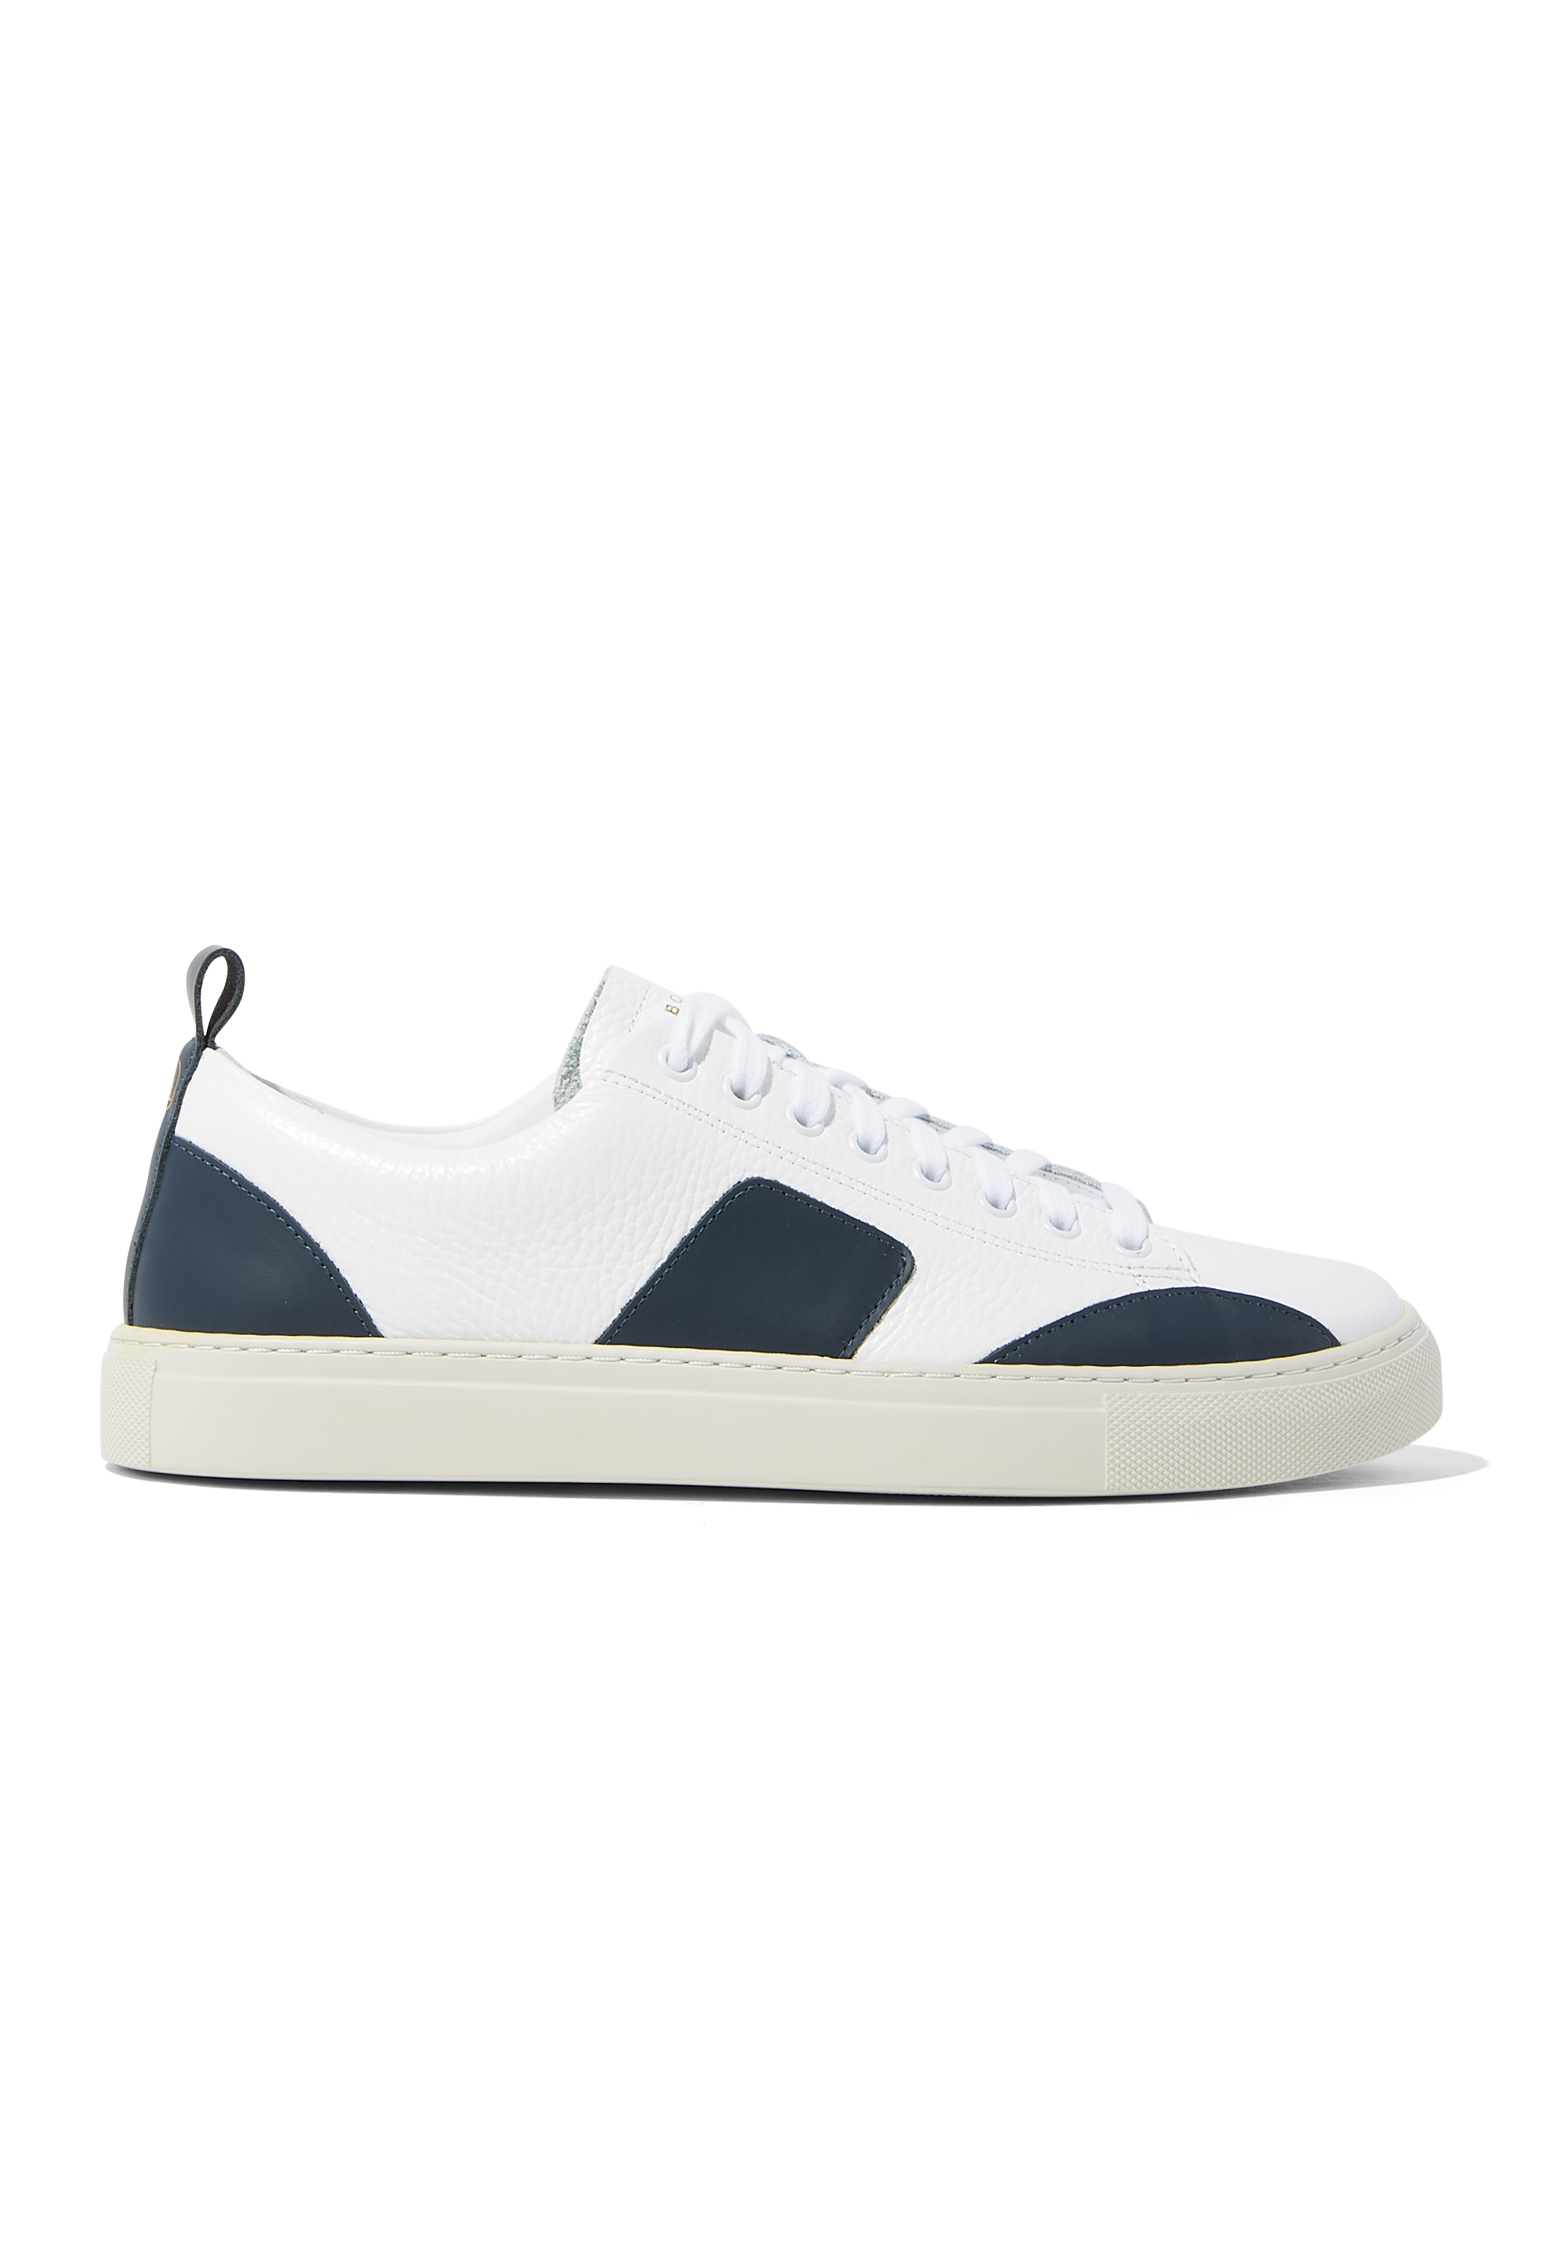 Boglioli White And Blue 100% Leather Sneakers In White And Blue Color